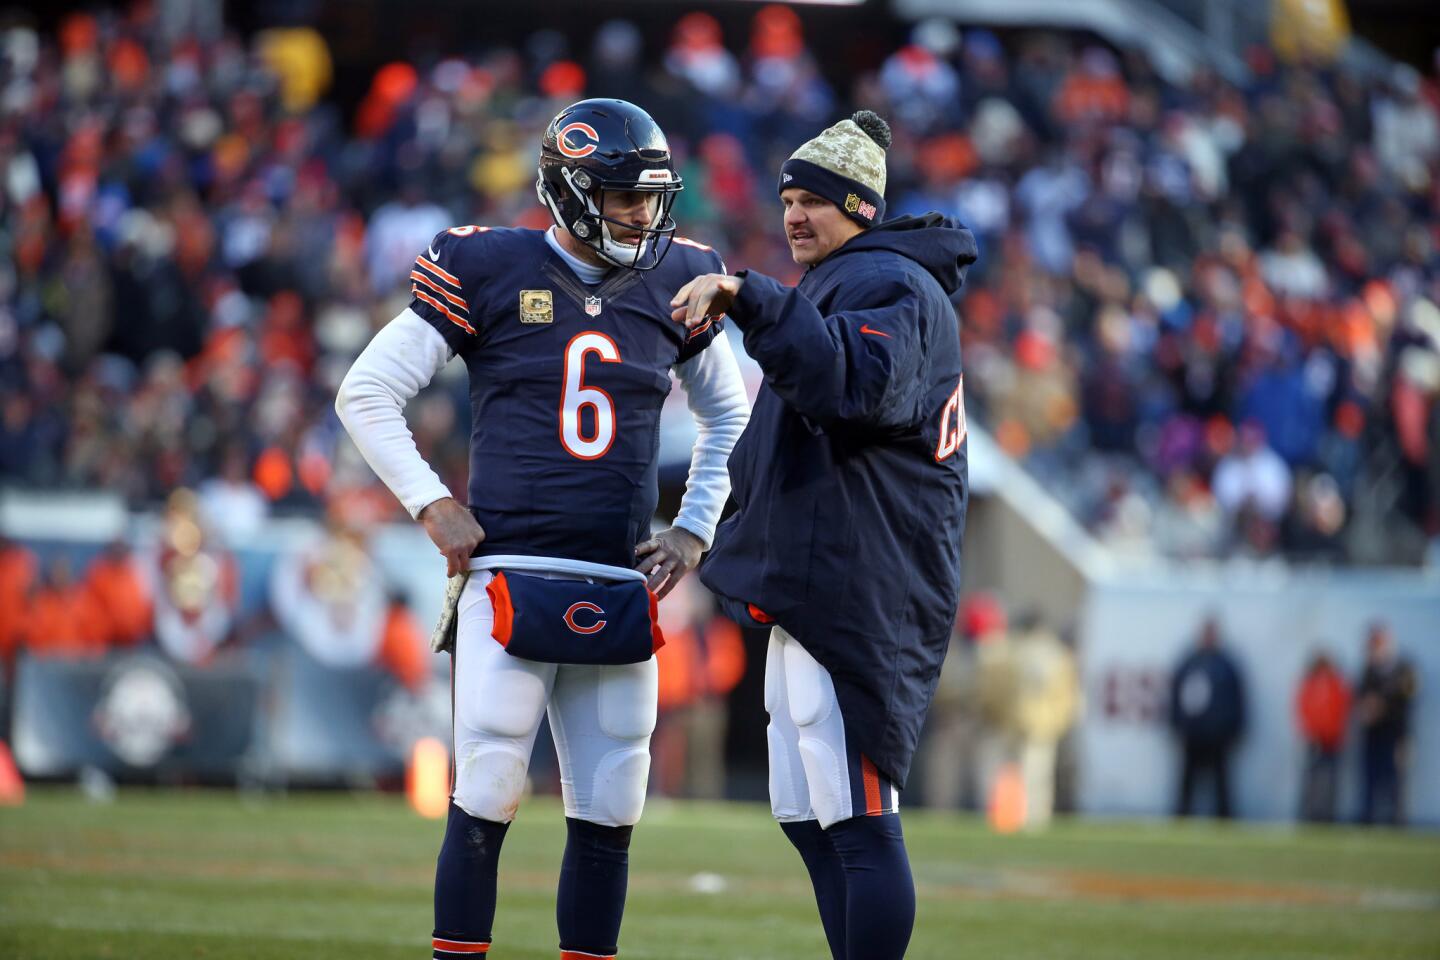 Bears quarterbacks Jay Cutler and Jimmy Clausen talk in the fourth quarter against the Broncos.